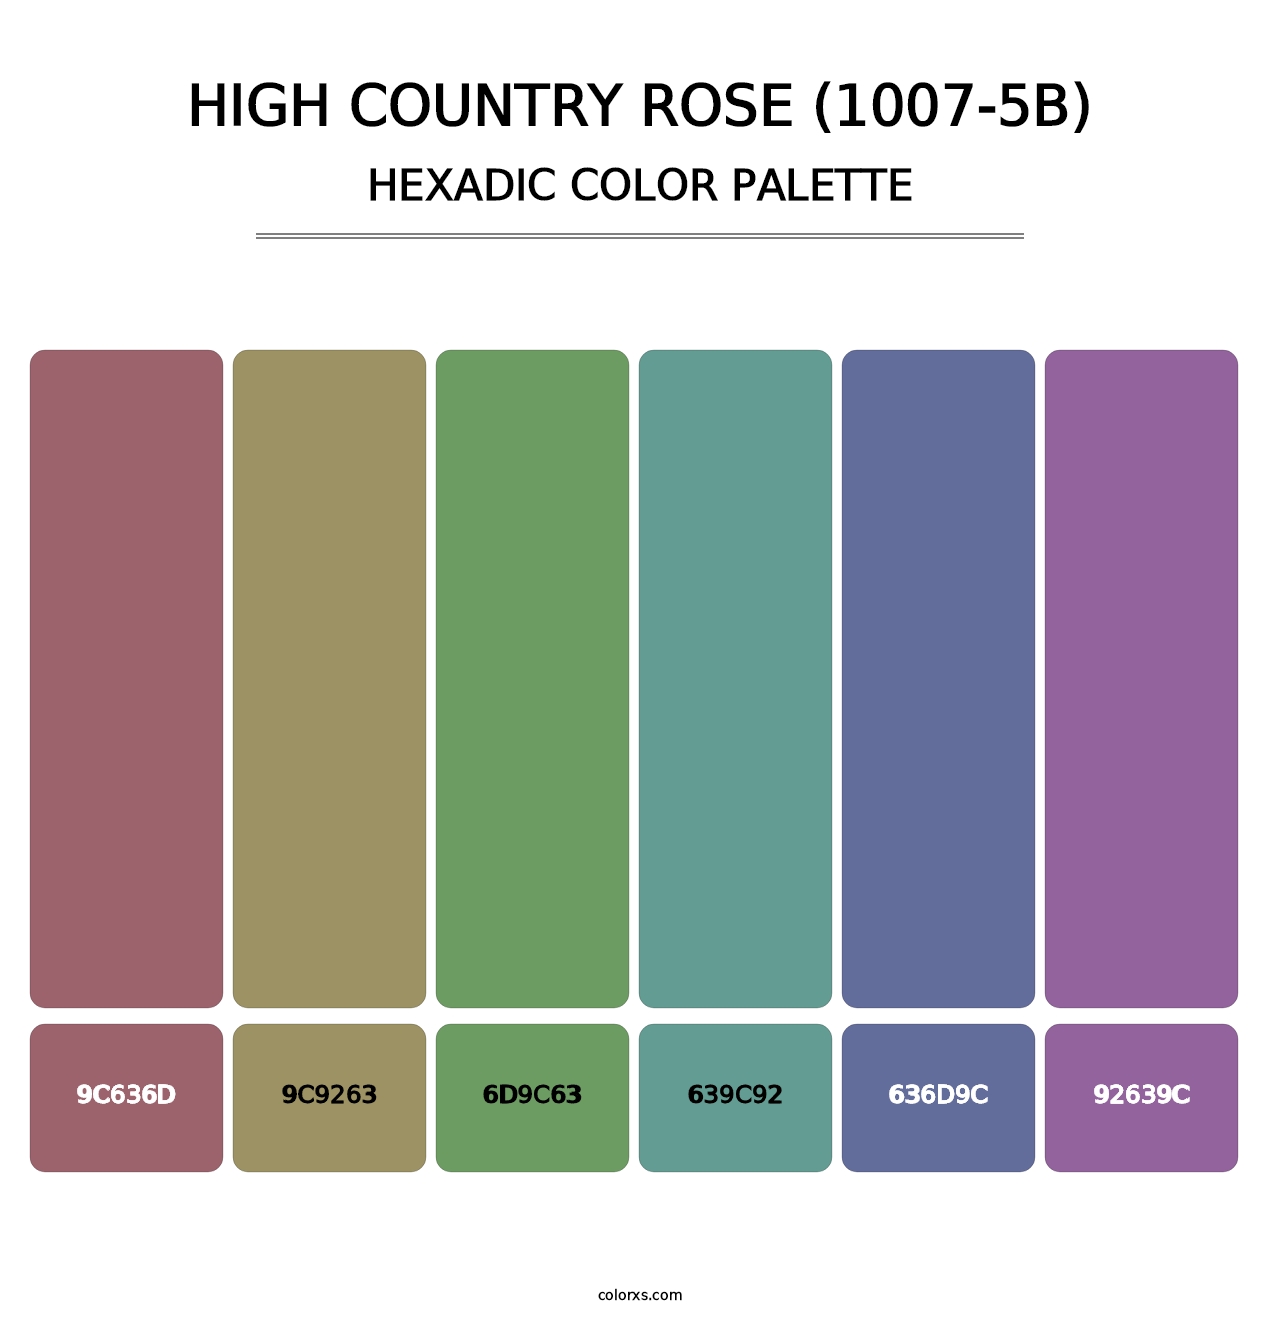 High Country Rose (1007-5B) - Hexadic Color Palette